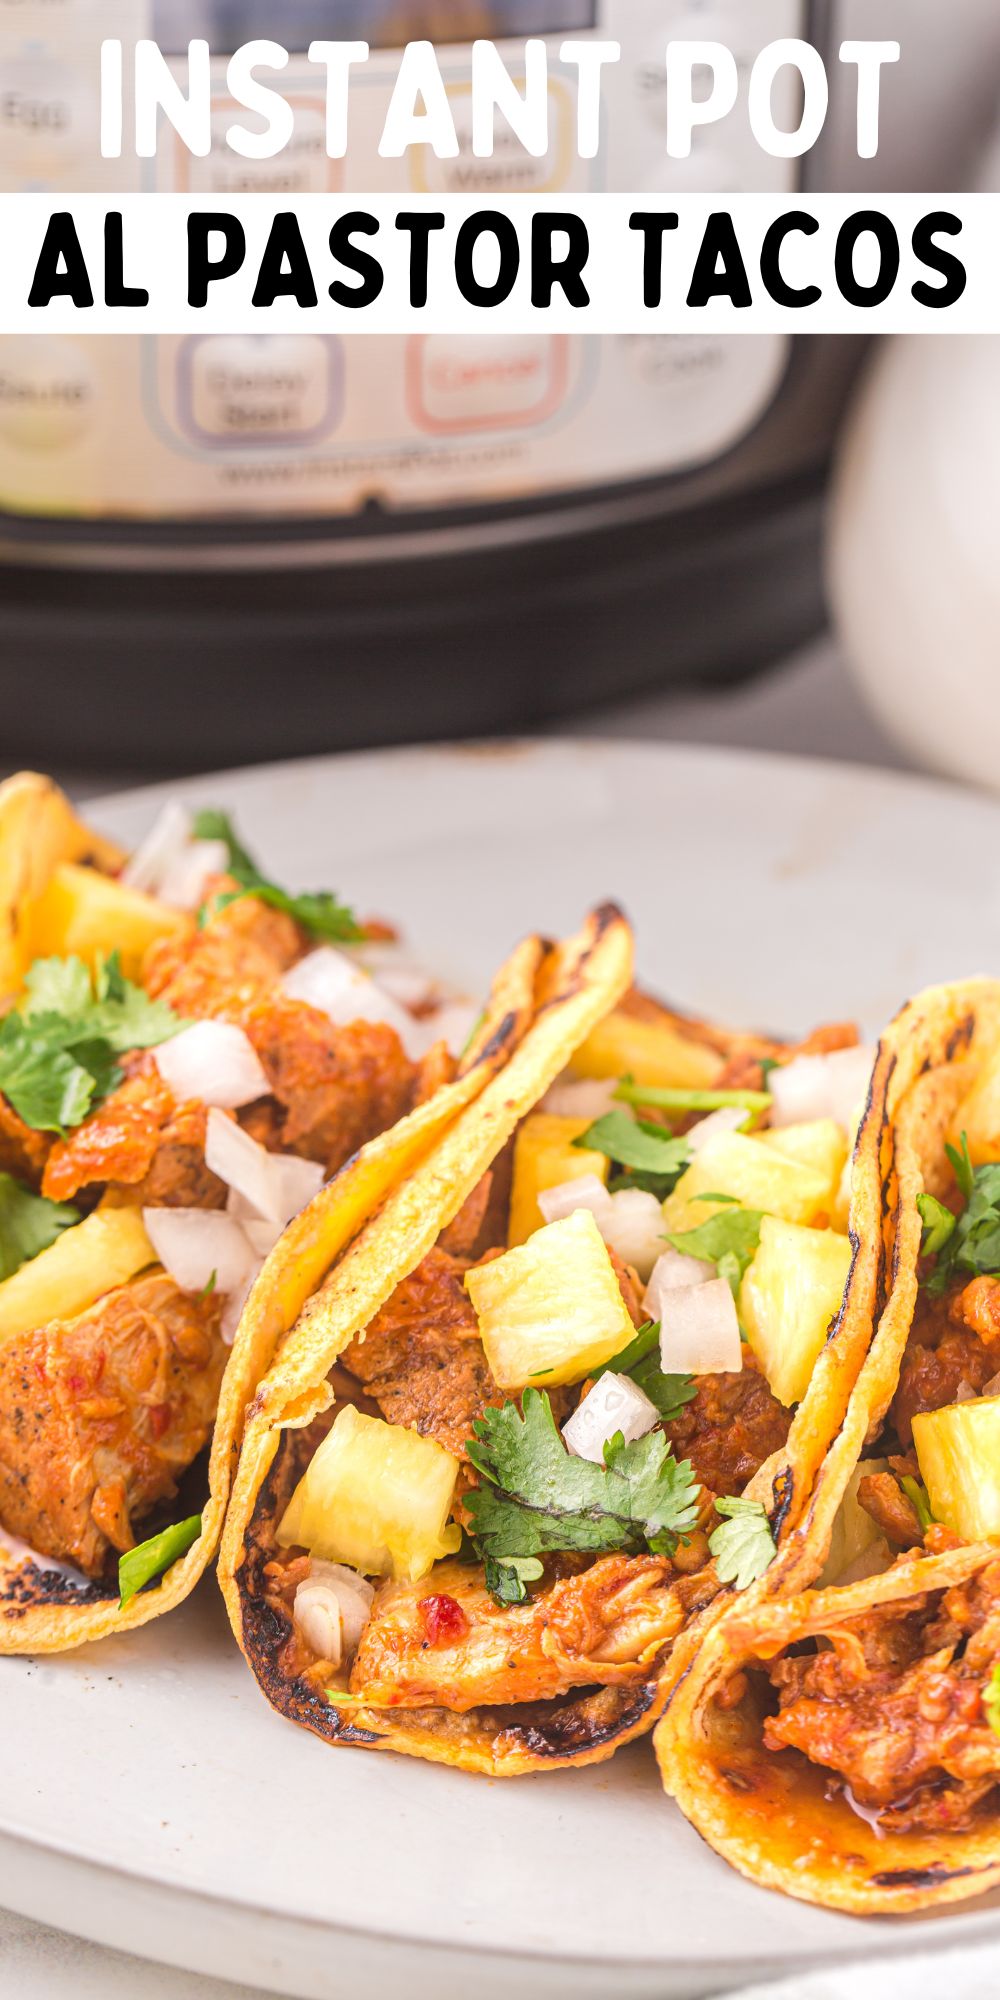 This Instant Pot Al Pastor Tacos recipe combines marinated pork with traditional Mexican spices and cooks to perfection in the Instant Pot. via @familyfresh